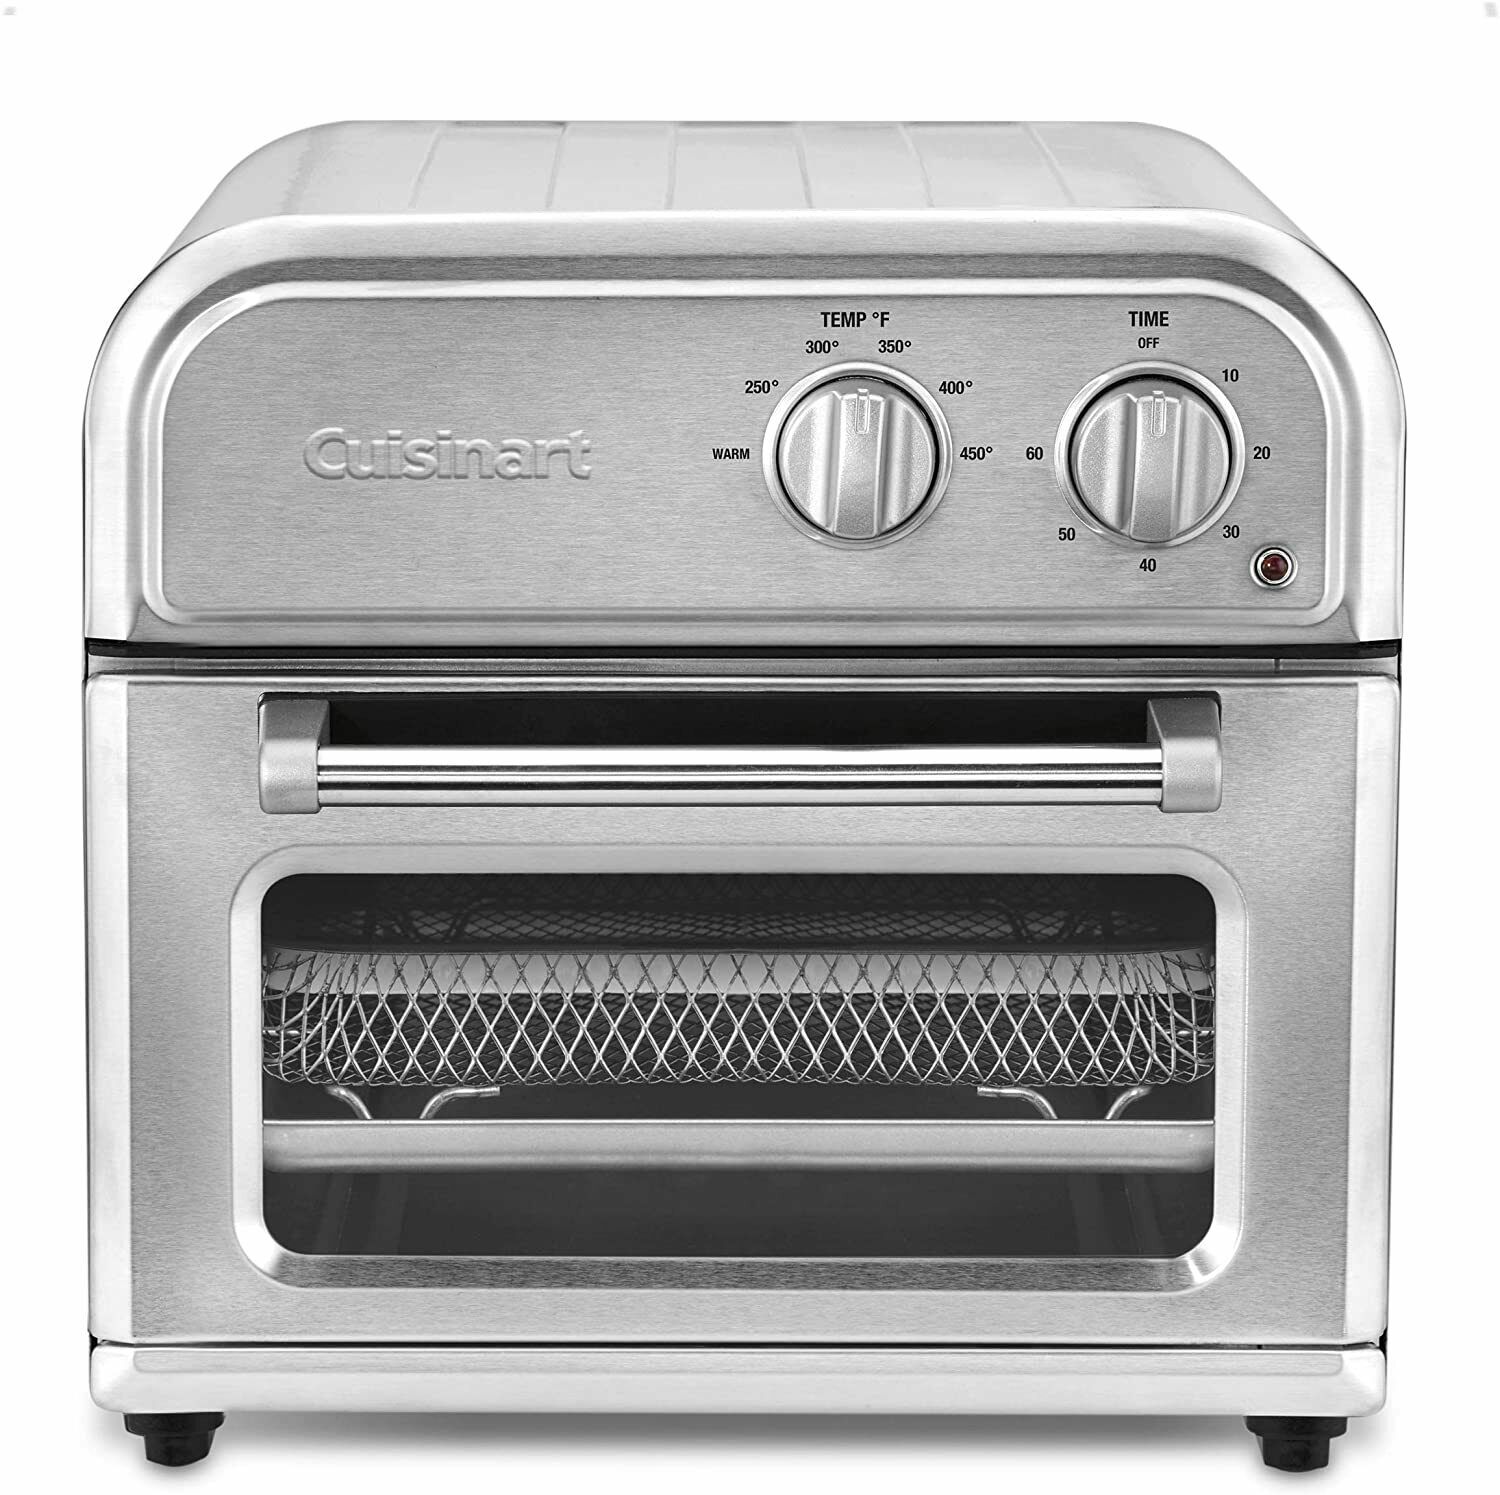 Cuisinart AFR-25 Compact Air Fryer - Brushed Stainless Steel - image 1 of 5